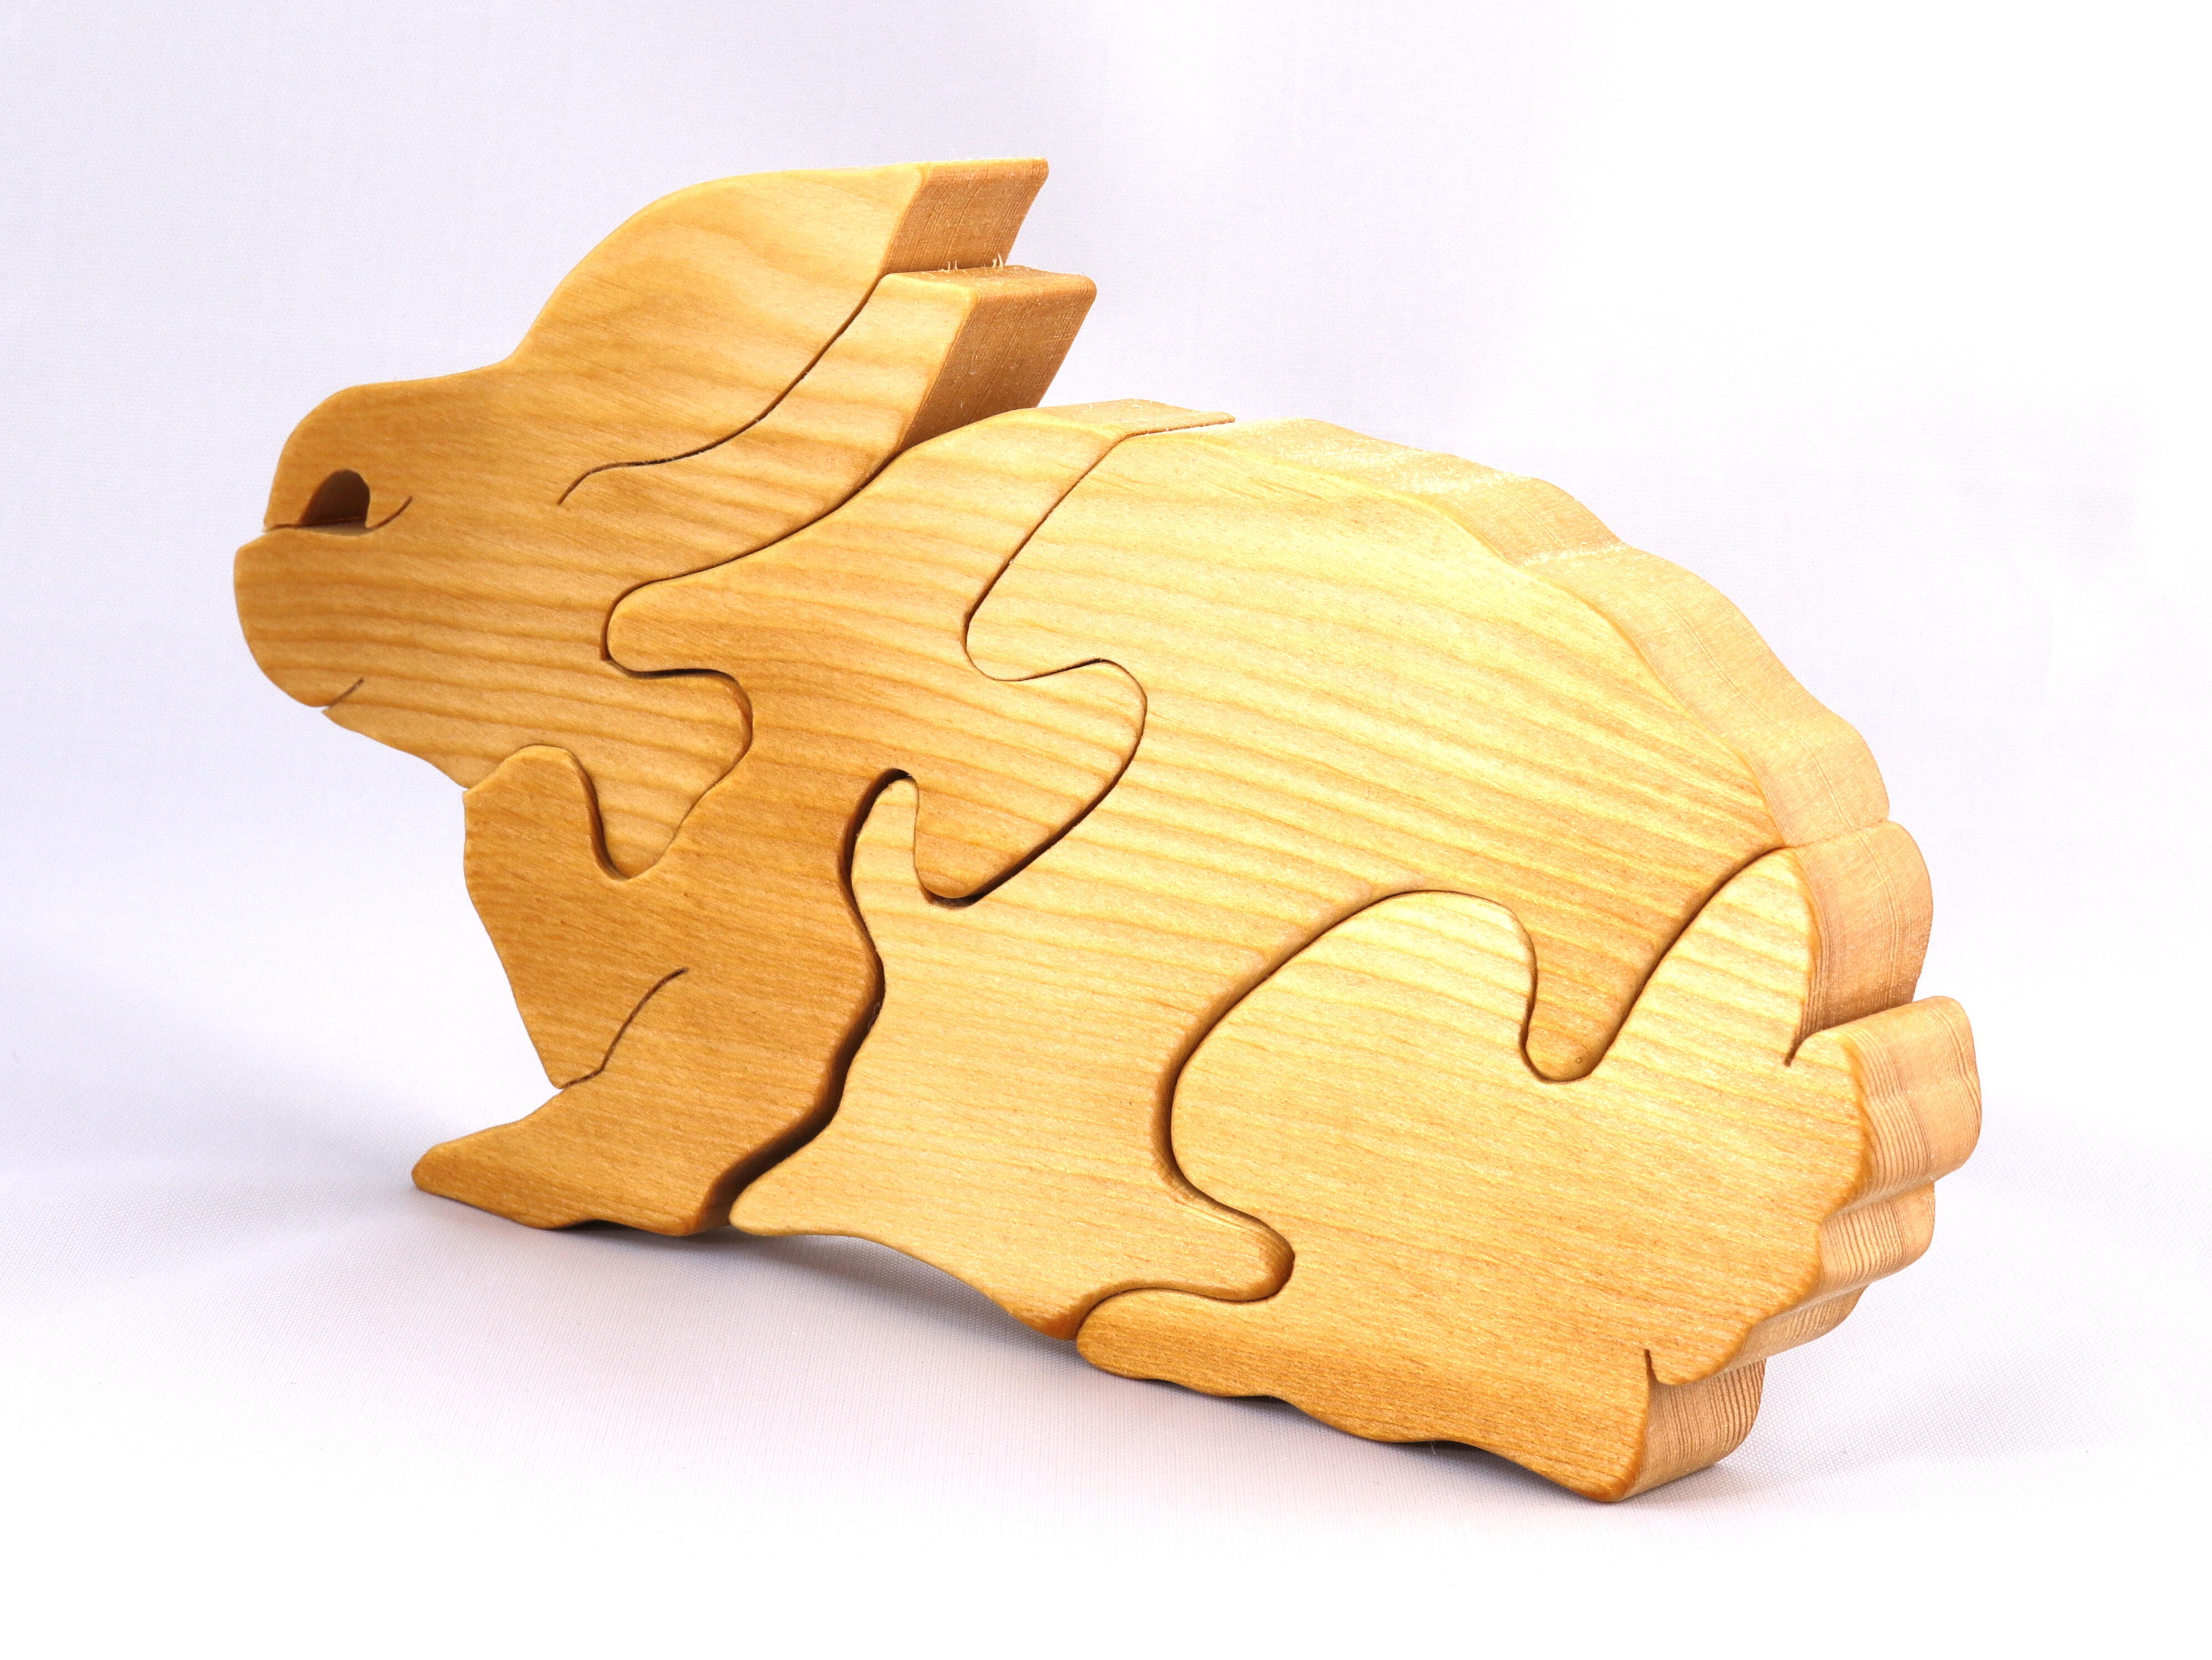 https://d1q8o8ch5u48ua.cloudfront.net/images/detailed/2301/20190804-112658_Handmade_Wooden_Handmade_Wooden_Bunny_Rabbit_Puzzle_Toy_726525521.jpg?t=1698807973